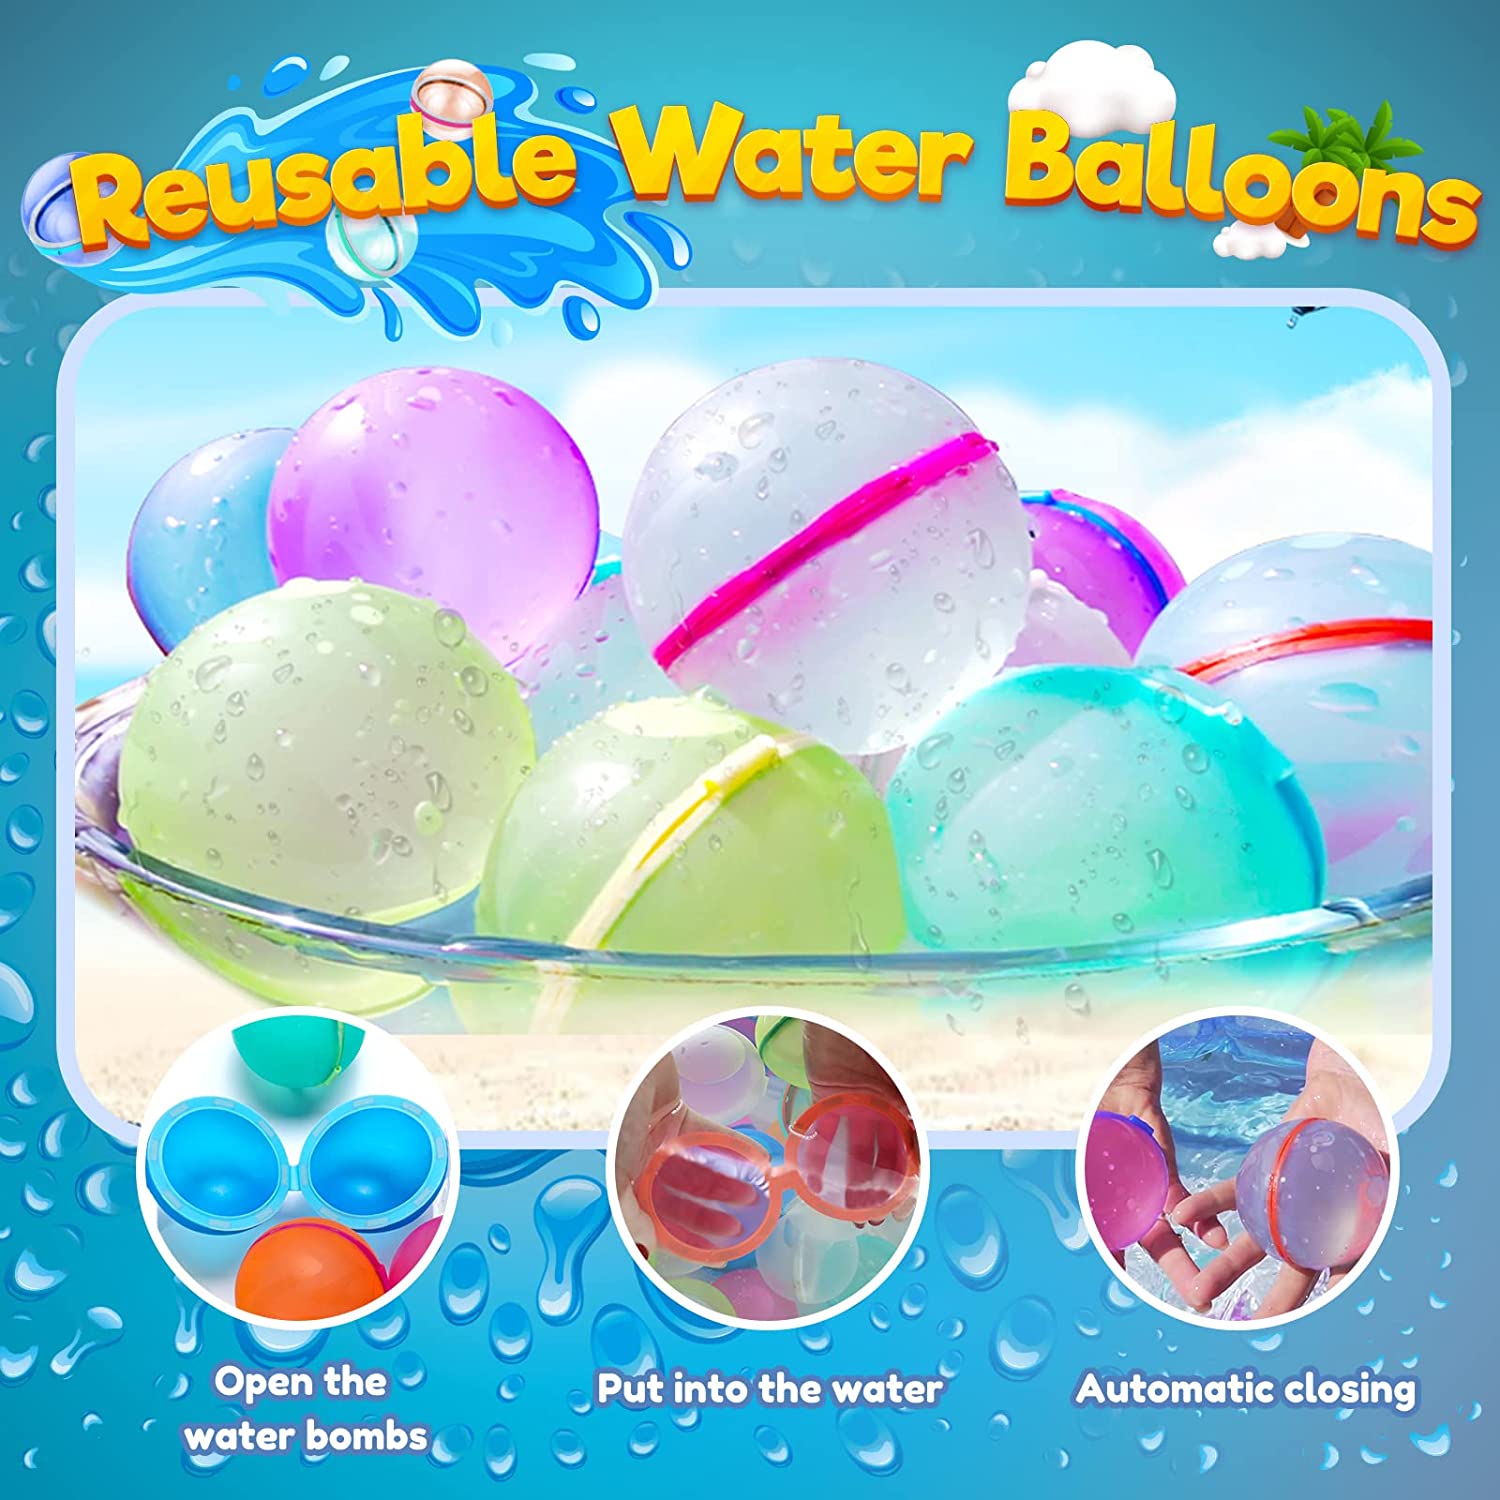 Kibtoy Self-sealing water ballons, silicone water toys, safe and fun